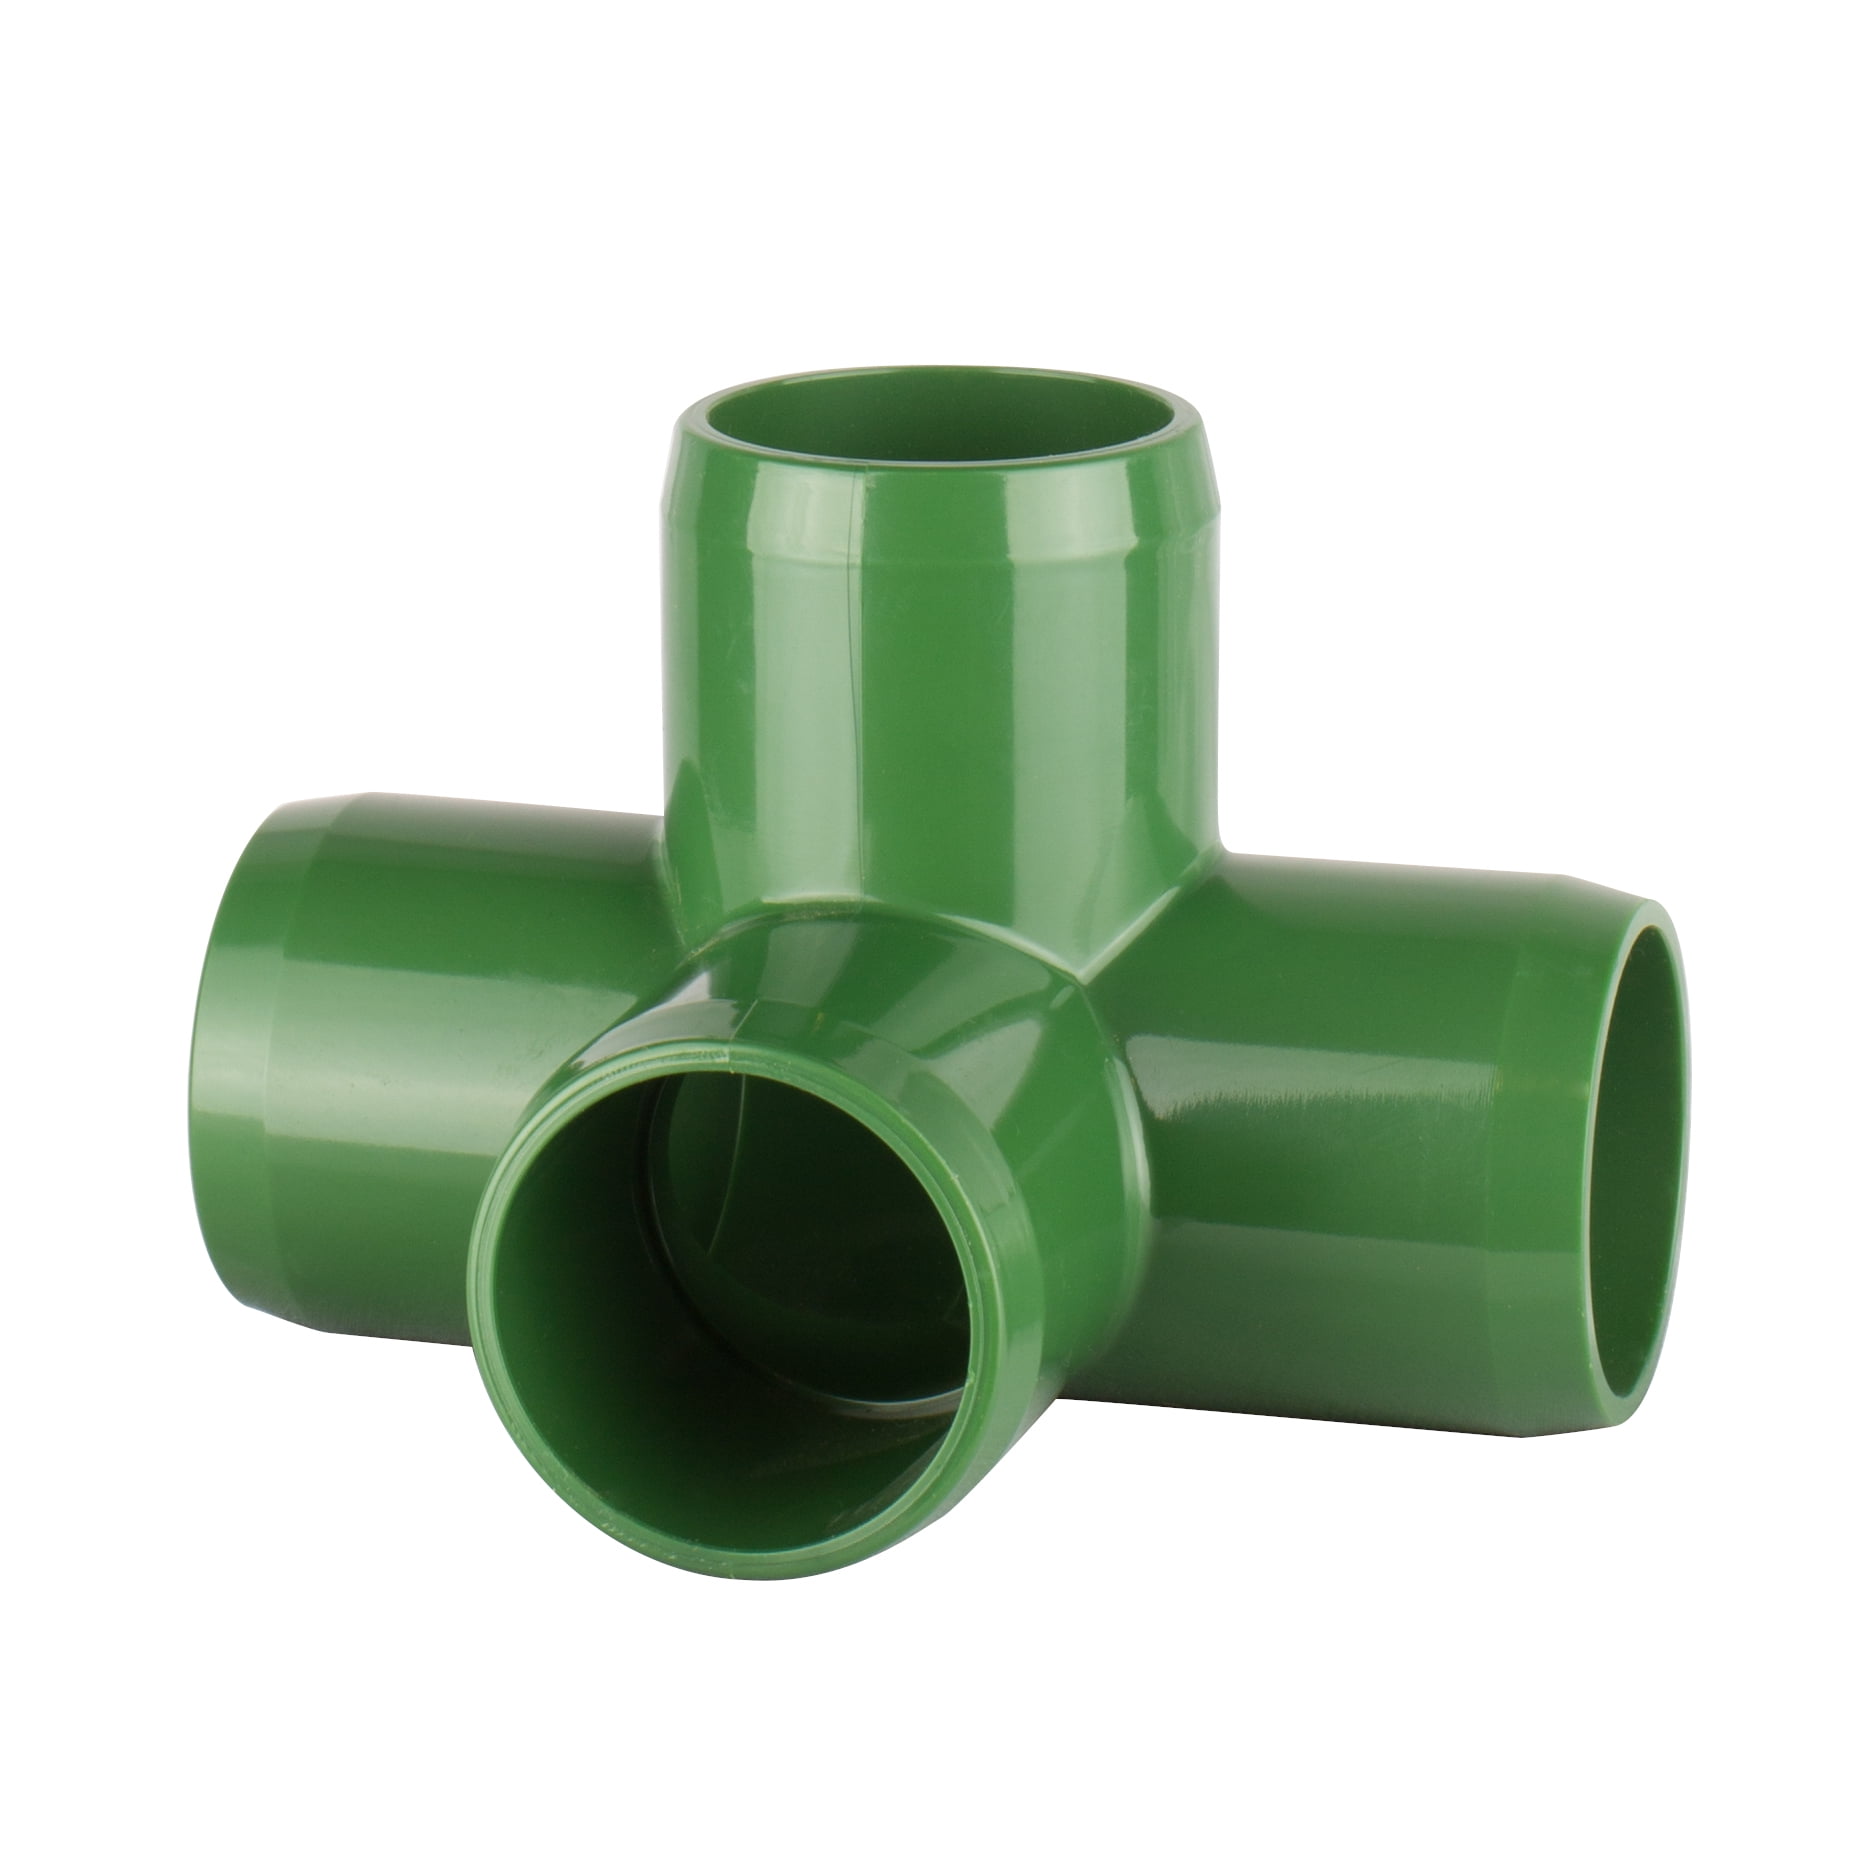 43-fg 1 In. 4 Way Lt Pvc Pipe Fitting - Green